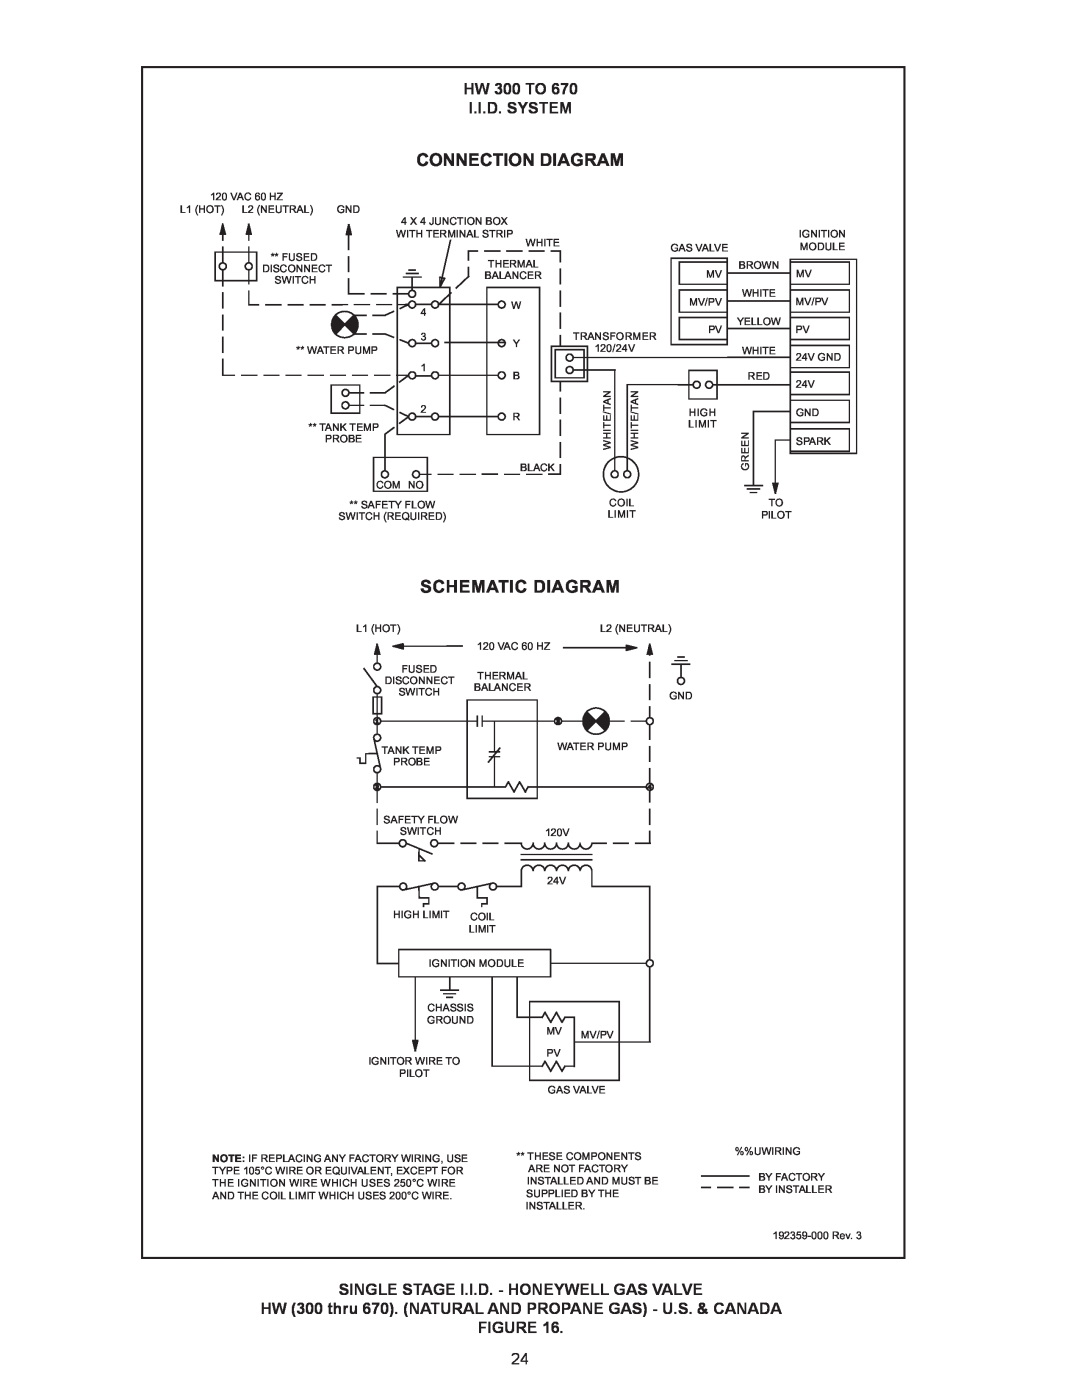 A.O. Smith HW 610 warranty Connection Diagram, Schematic Diagram, HW 300 TO I.I.D. SYSTEM 